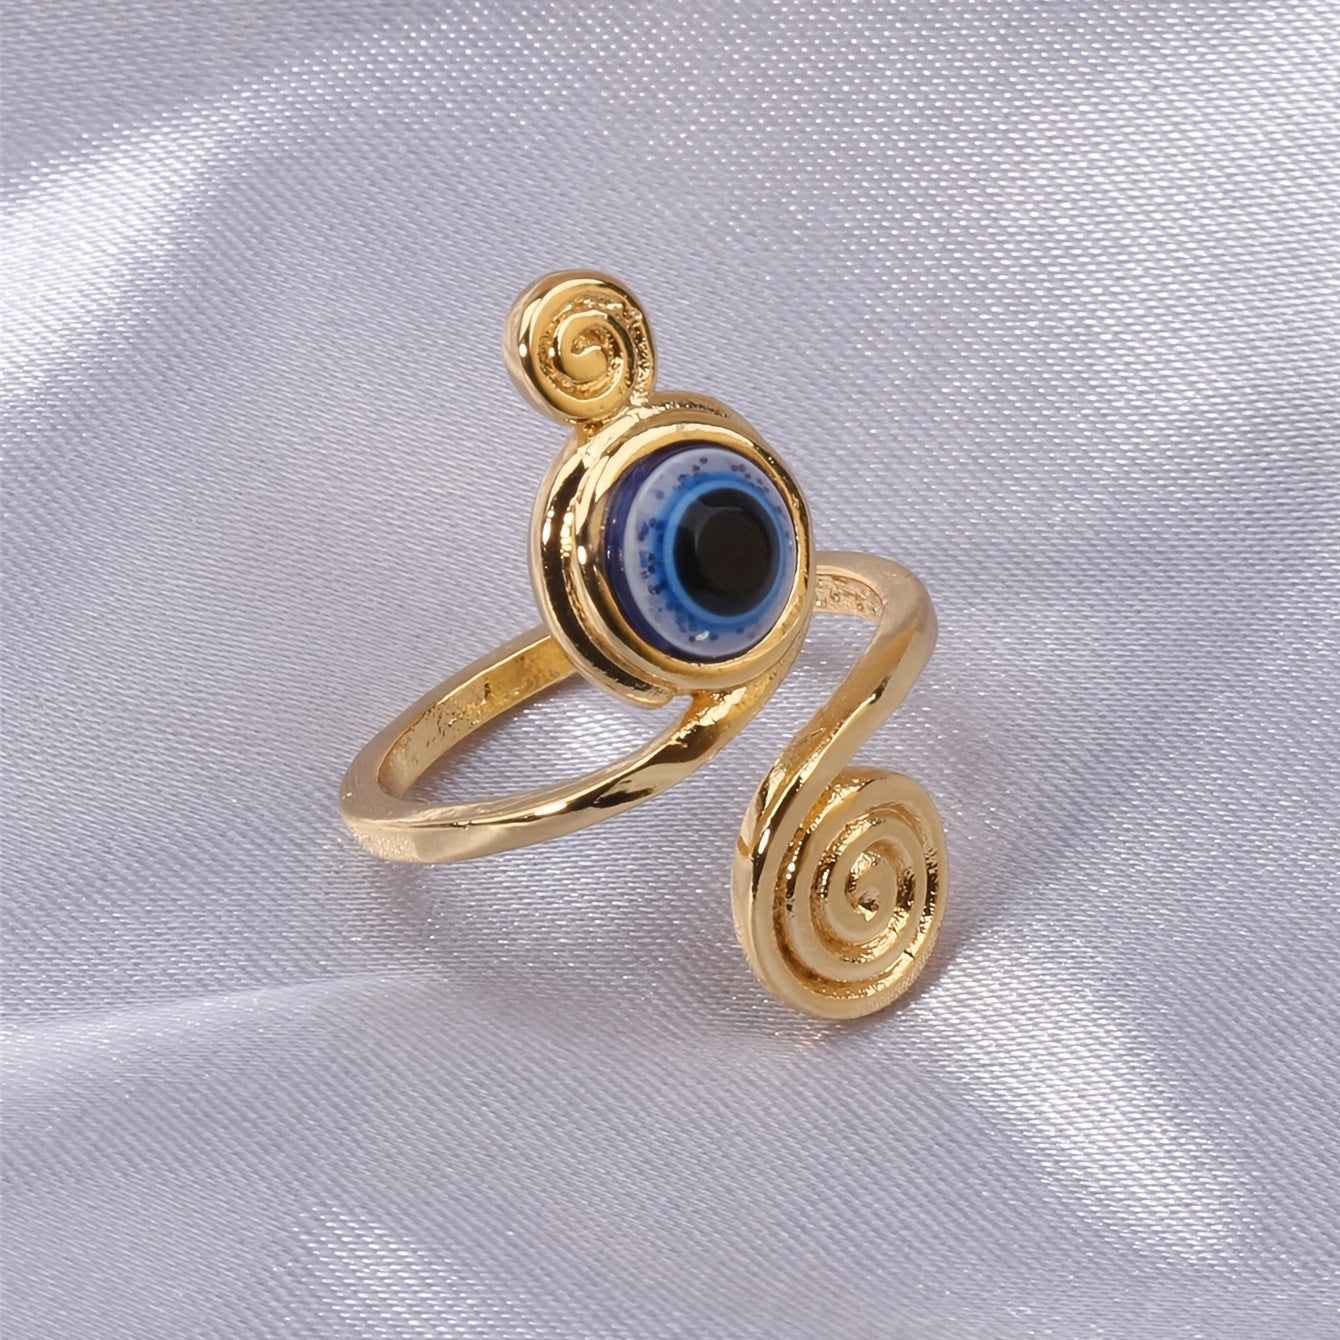 1 Pc Vintage Style Evil Eye Toe Ring Summer Beach Foot Jewelry Gift Adjustable